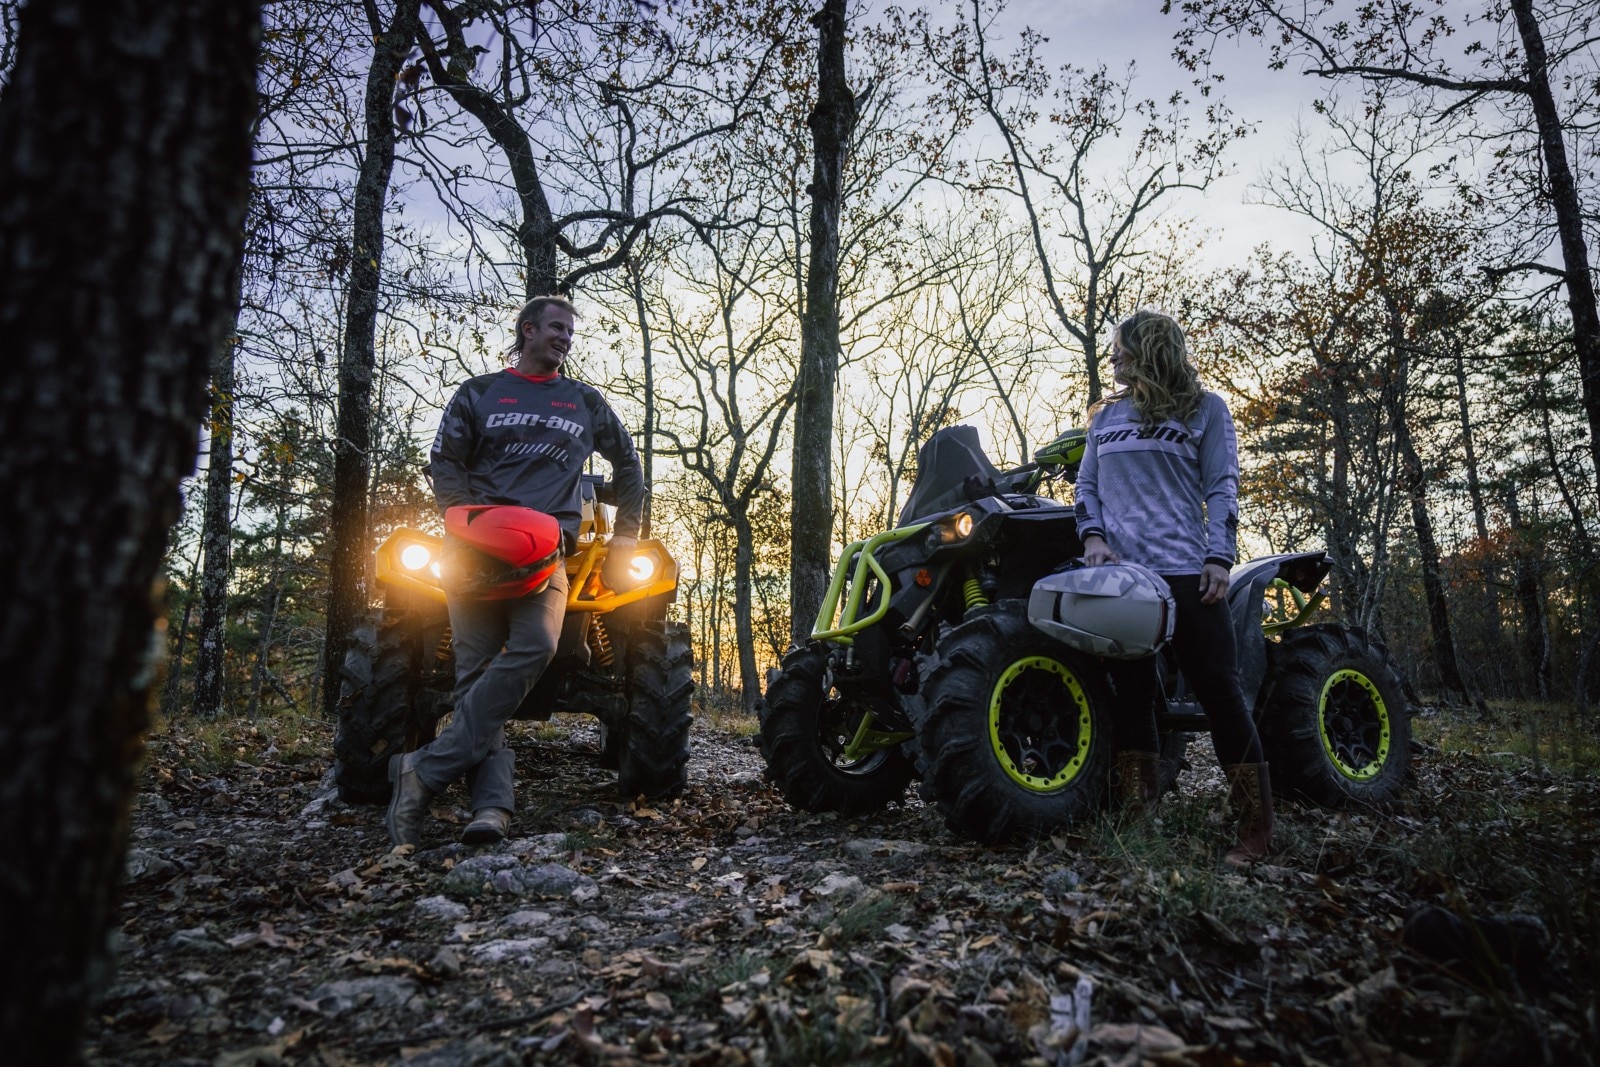 WHAT TO WEAR WHEN RIDING AN ATV / SSV